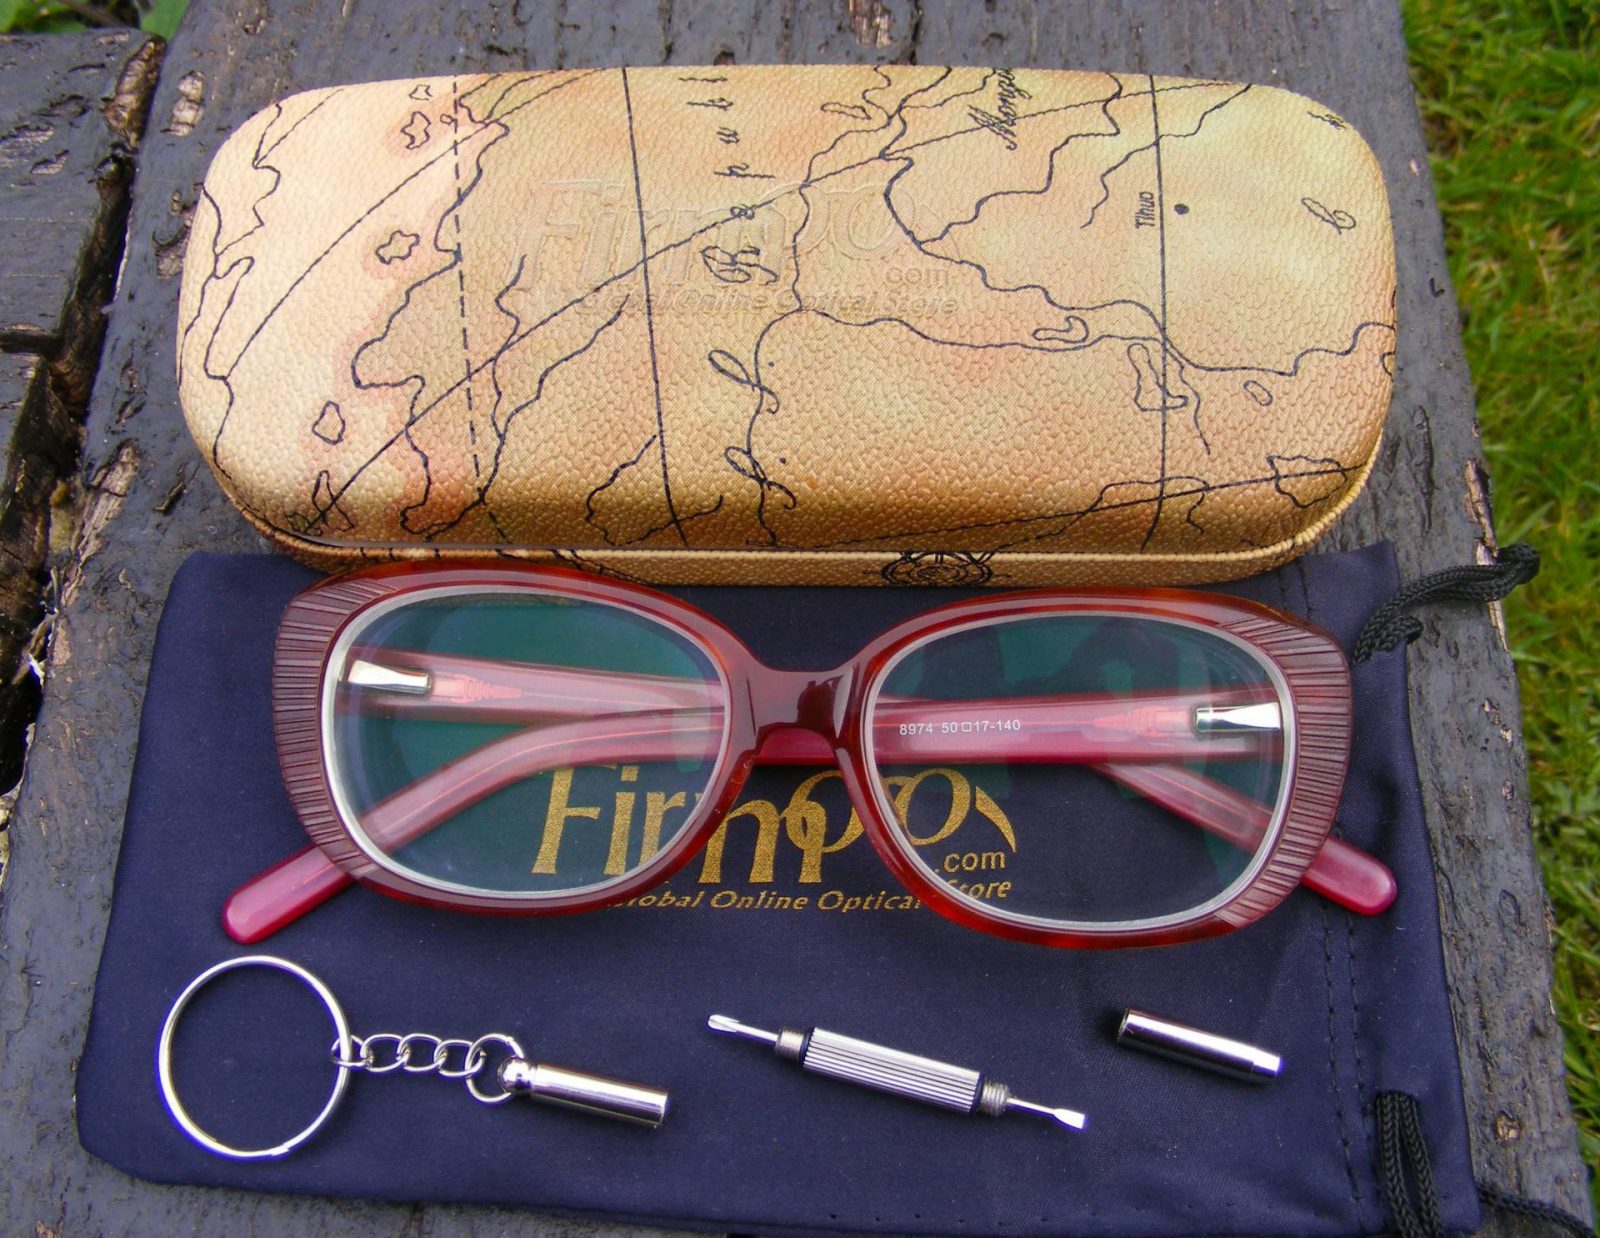 Firmoo glasses and case